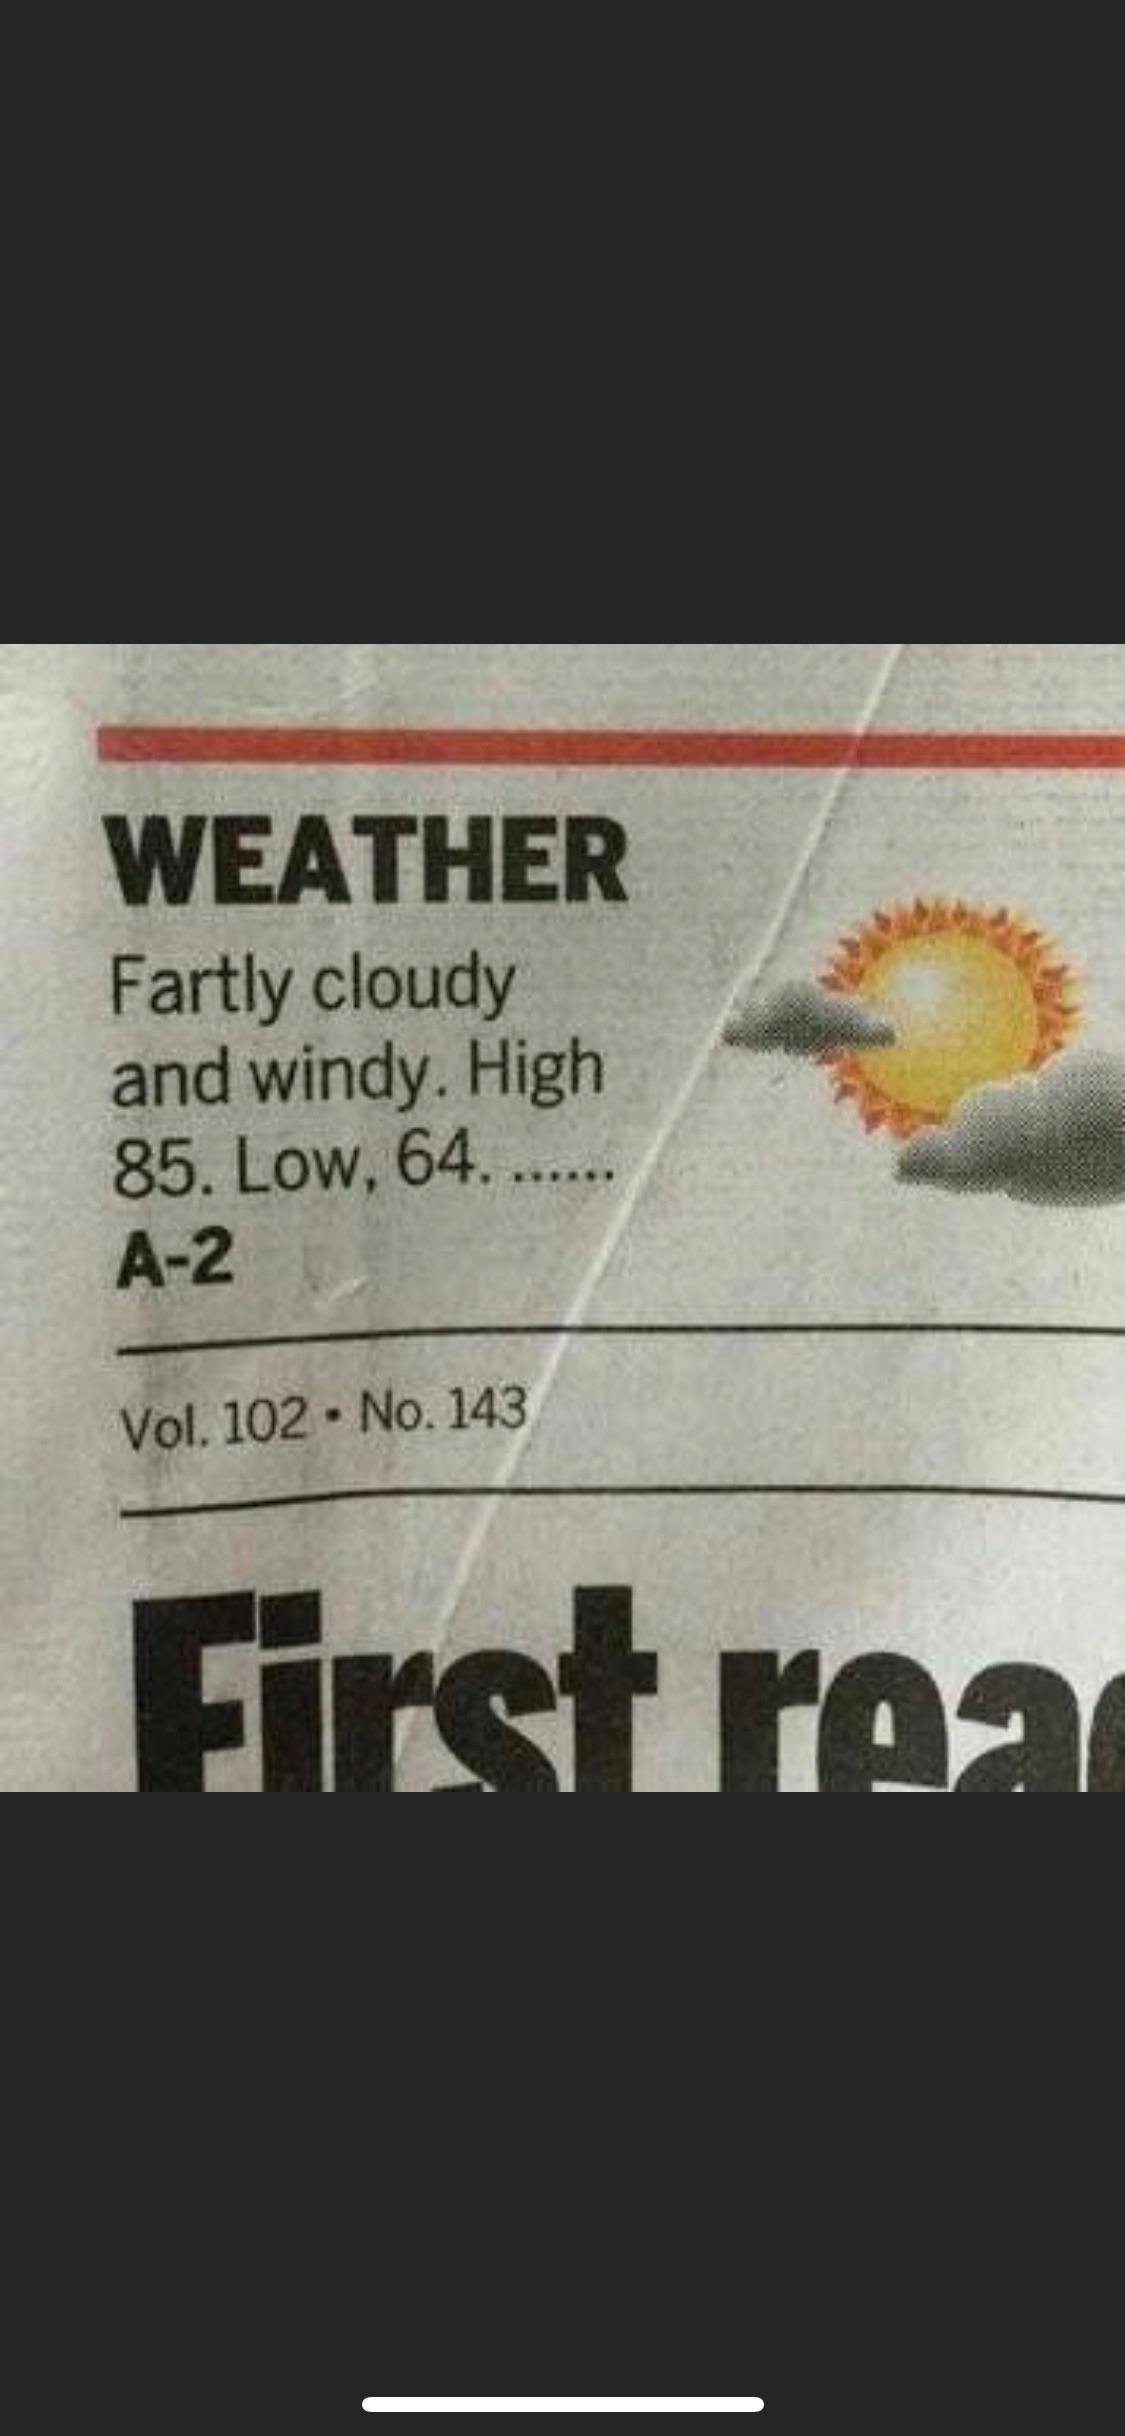 My mom sent me this and said “a weather forecast that really stinks”